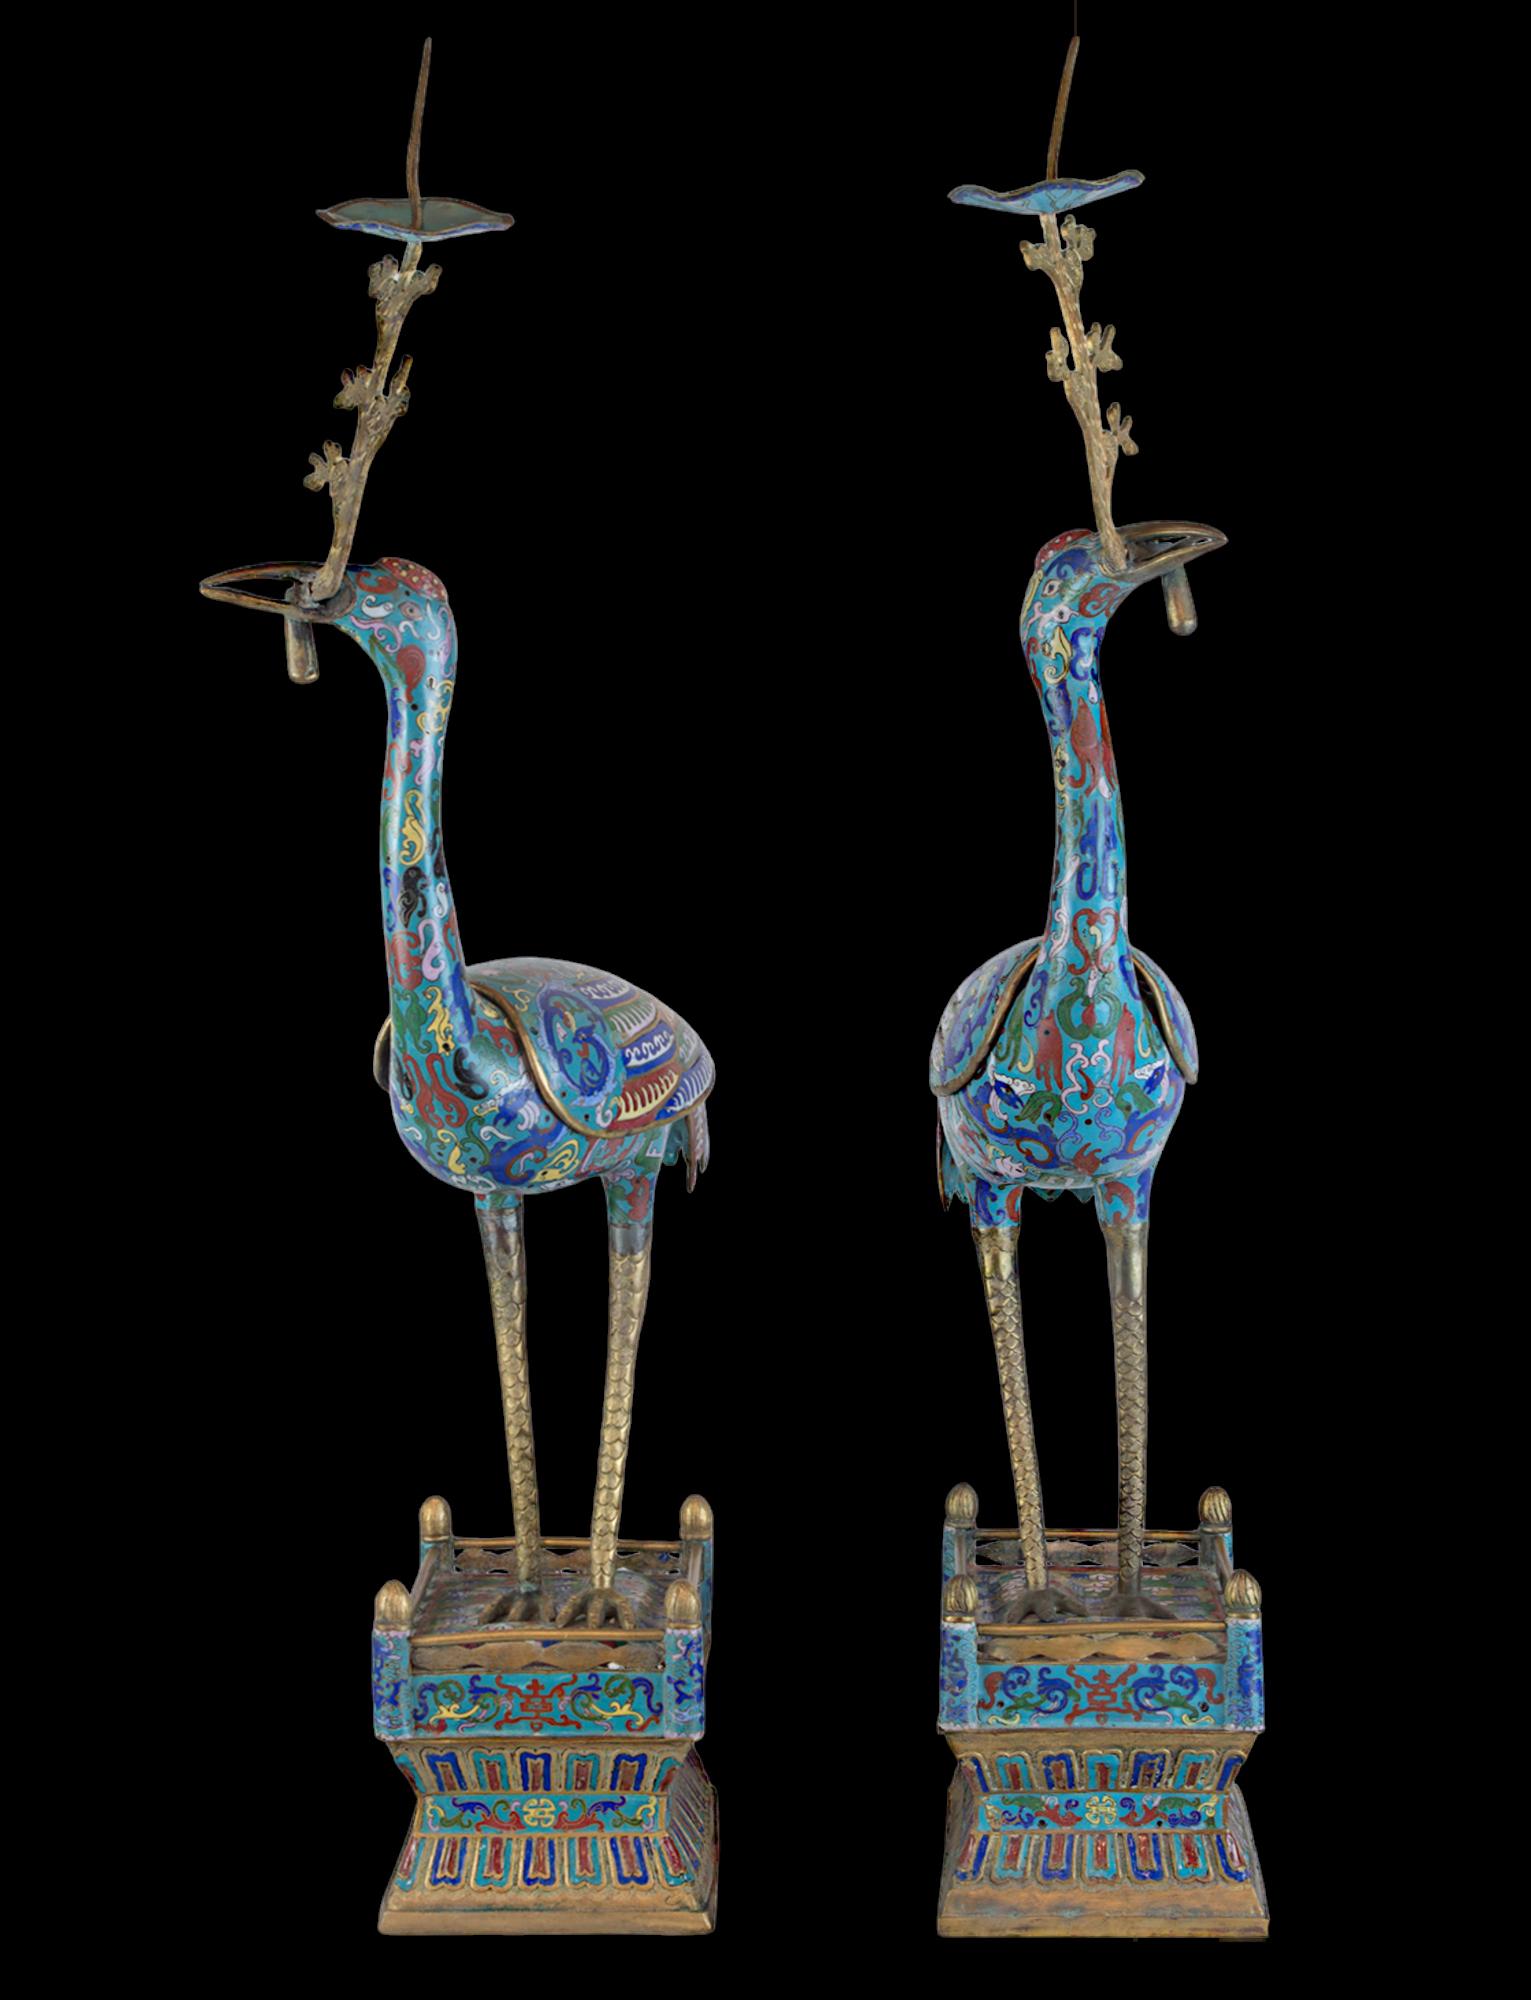 This darling pair of cloisonné crane pricket candlesticks would be the perfect addition to any home. In Chinese mythology the symbol of the crane represents longevity, and the depiction of two side by side are meant to project ultimate longevity.